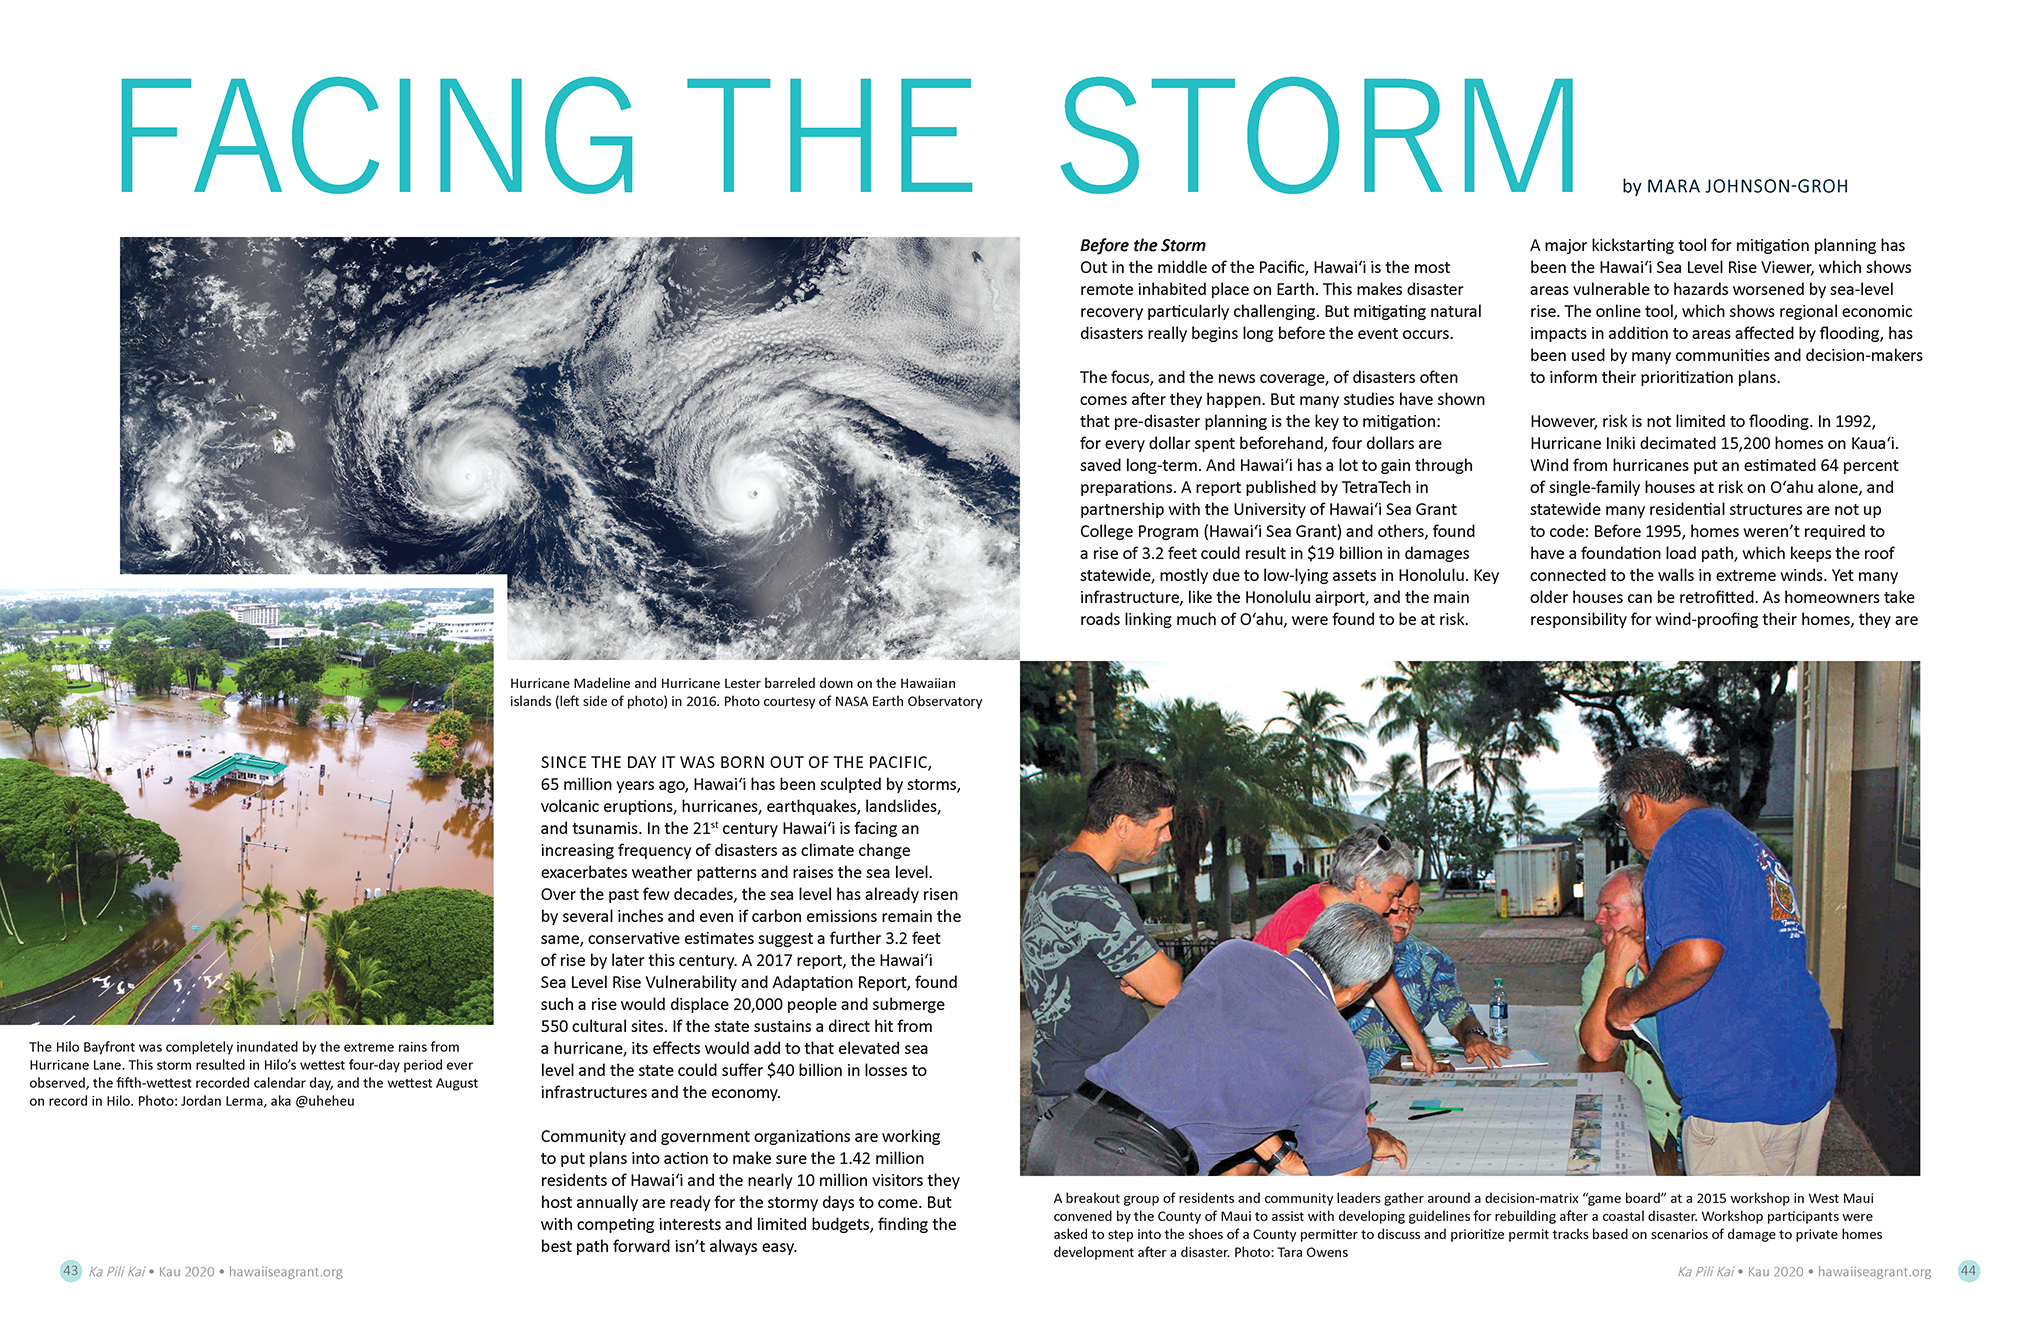 Title layout including sattelite pacific hurrican image, Hilo flooding, and community planning group around a table